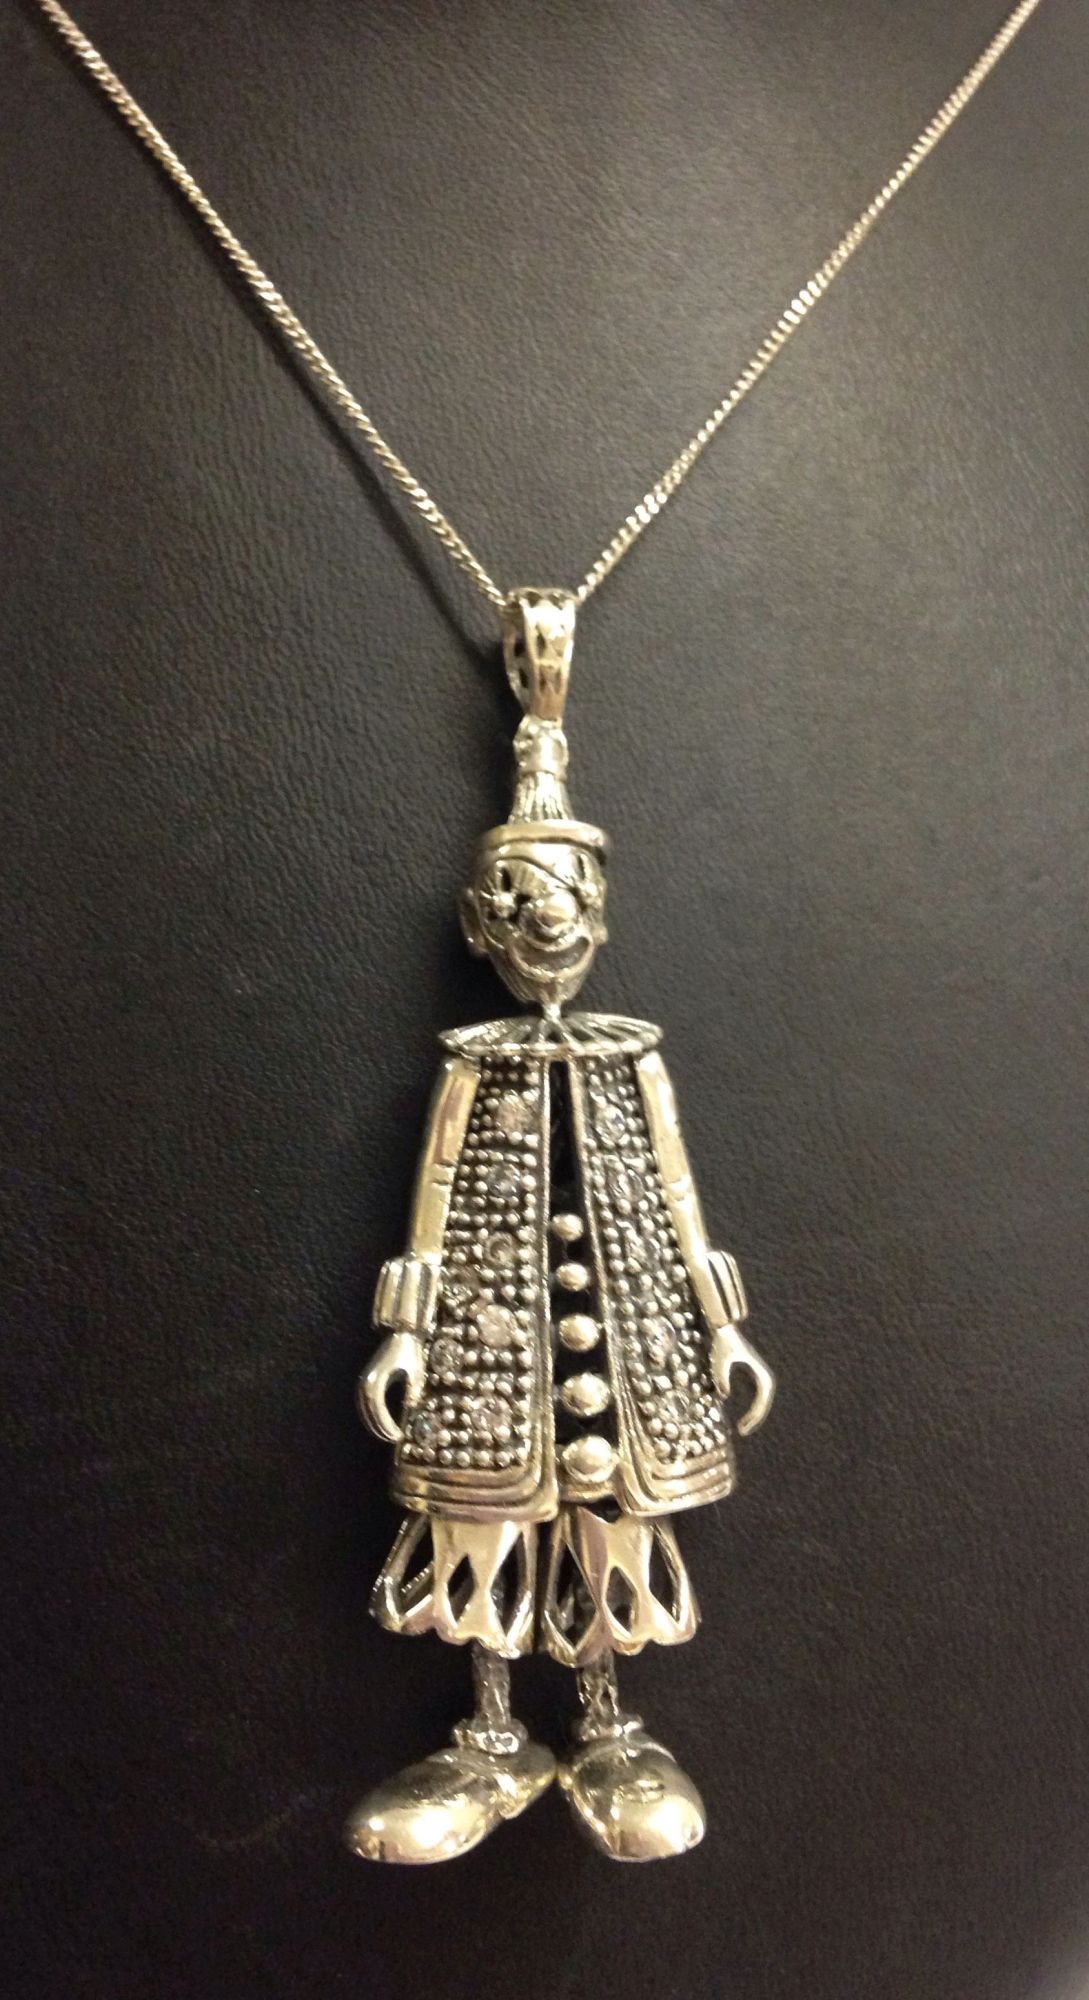 Large 925 silver reticulated clown pendant set with crystals. Measures 7cm long to the top of the